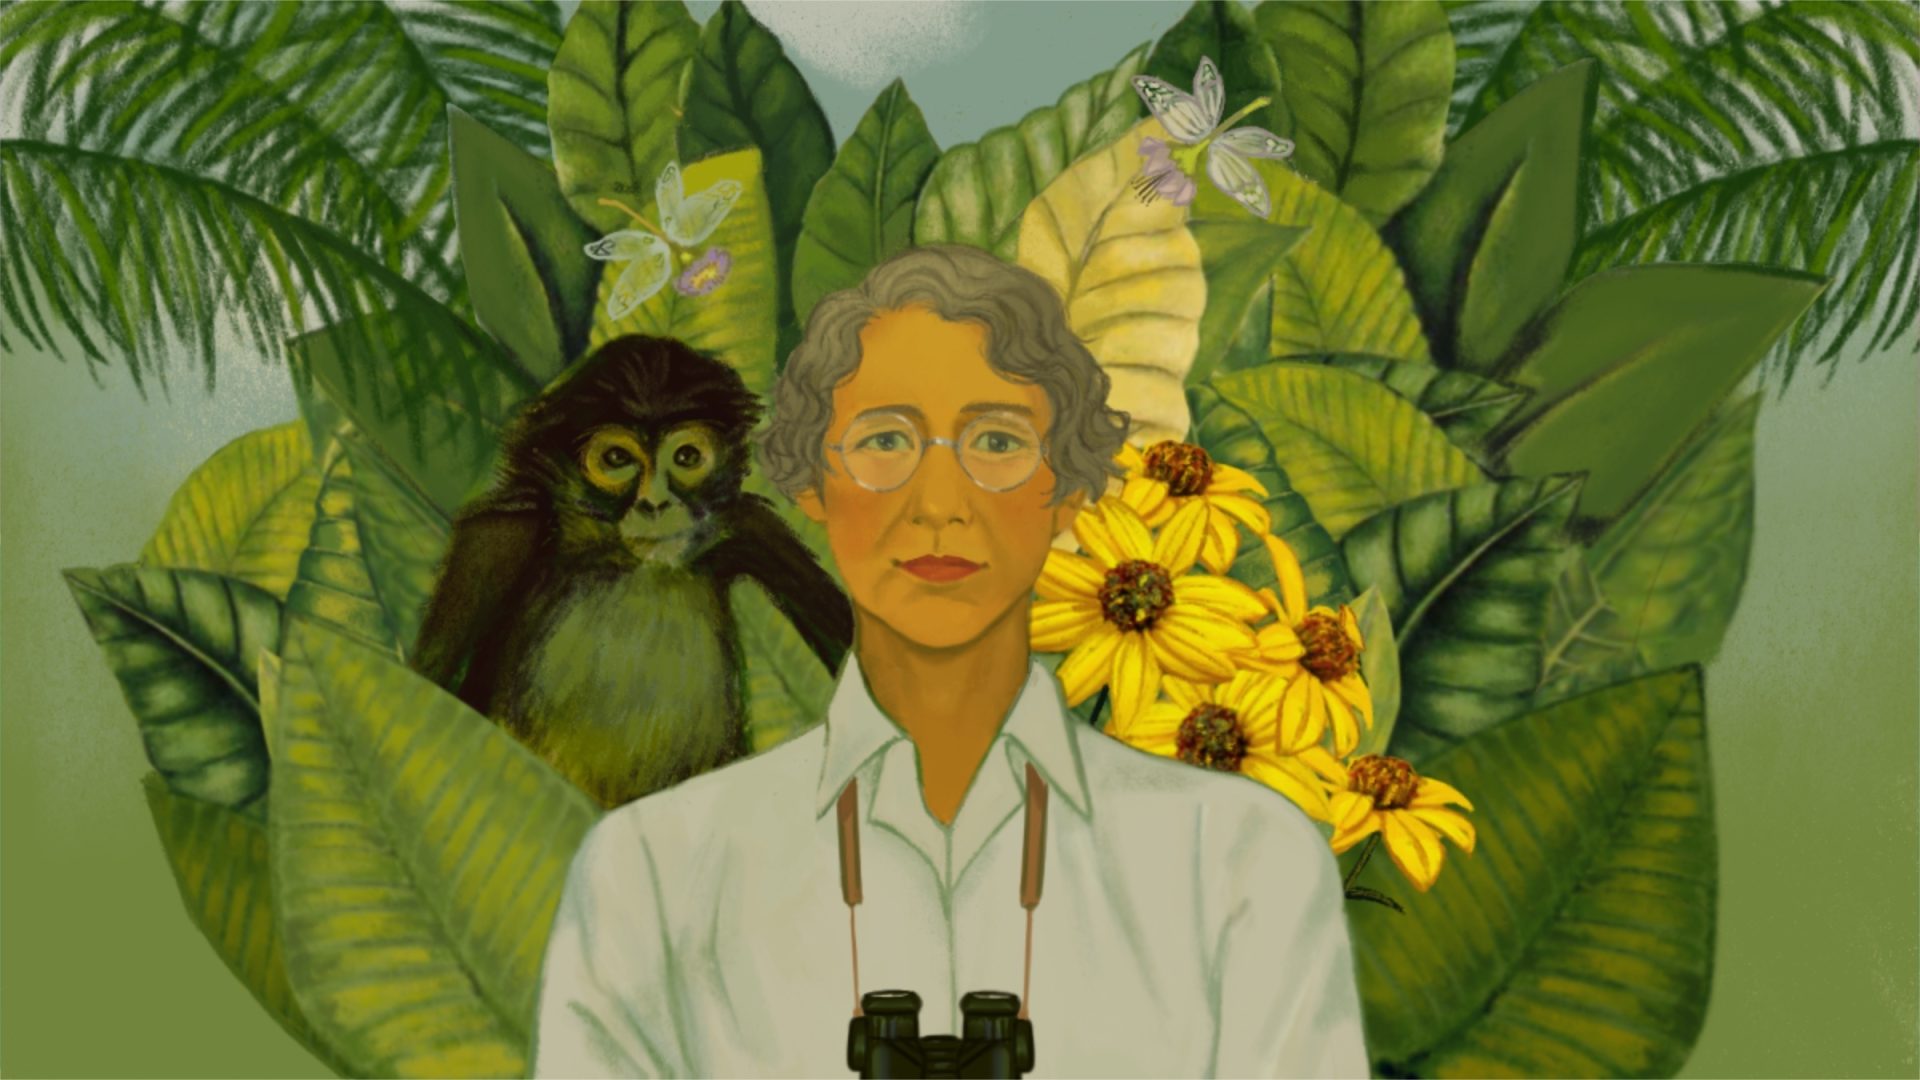 Portrait of Ynés Mexia in the style of Frida Kahlo’s “Self Portrait with Monkey.”